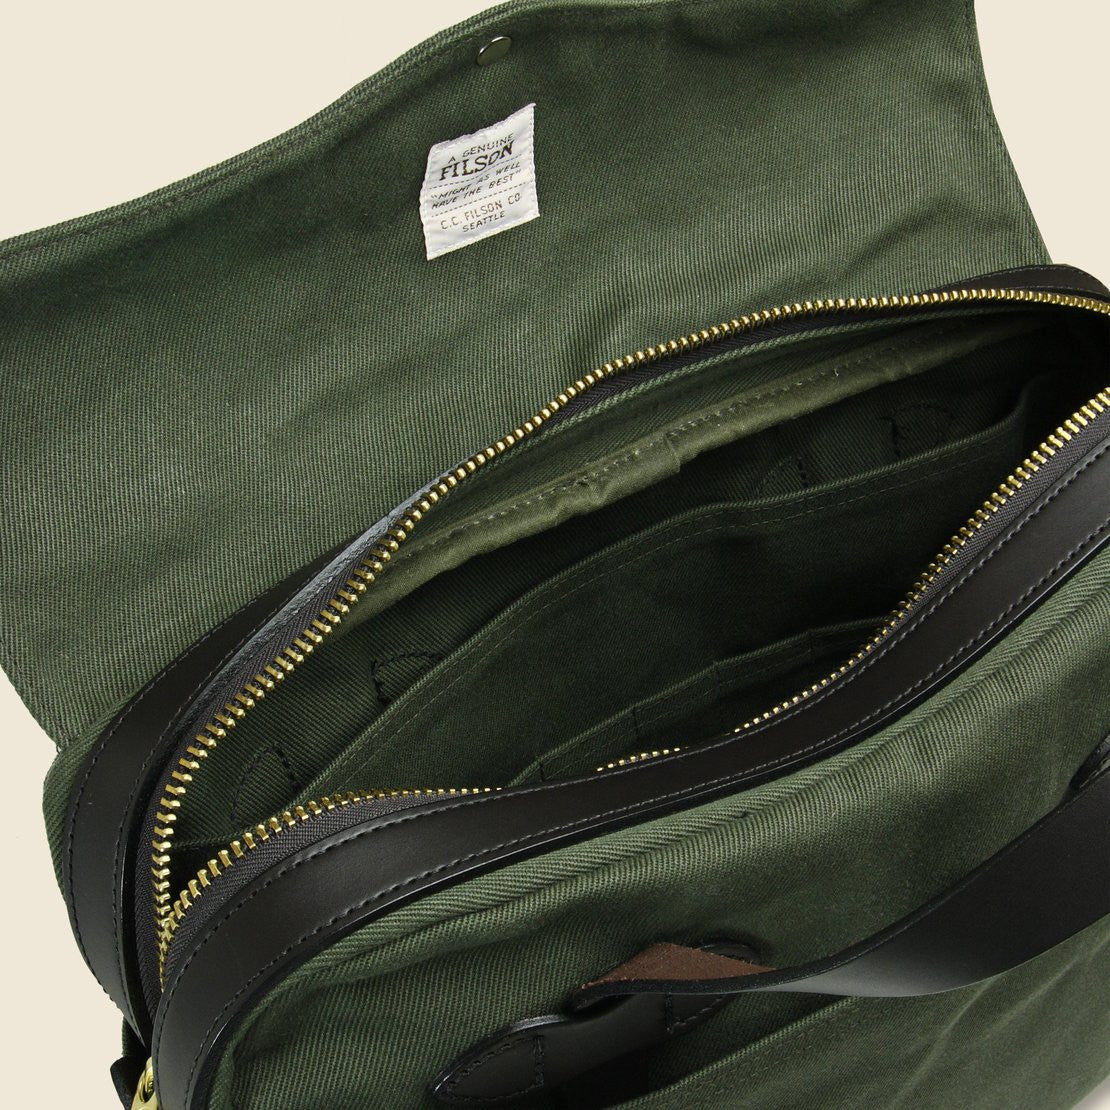 Original Briefcase - Otter Green - Filson - STAG Provisions - Accessories - Bags / Luggage